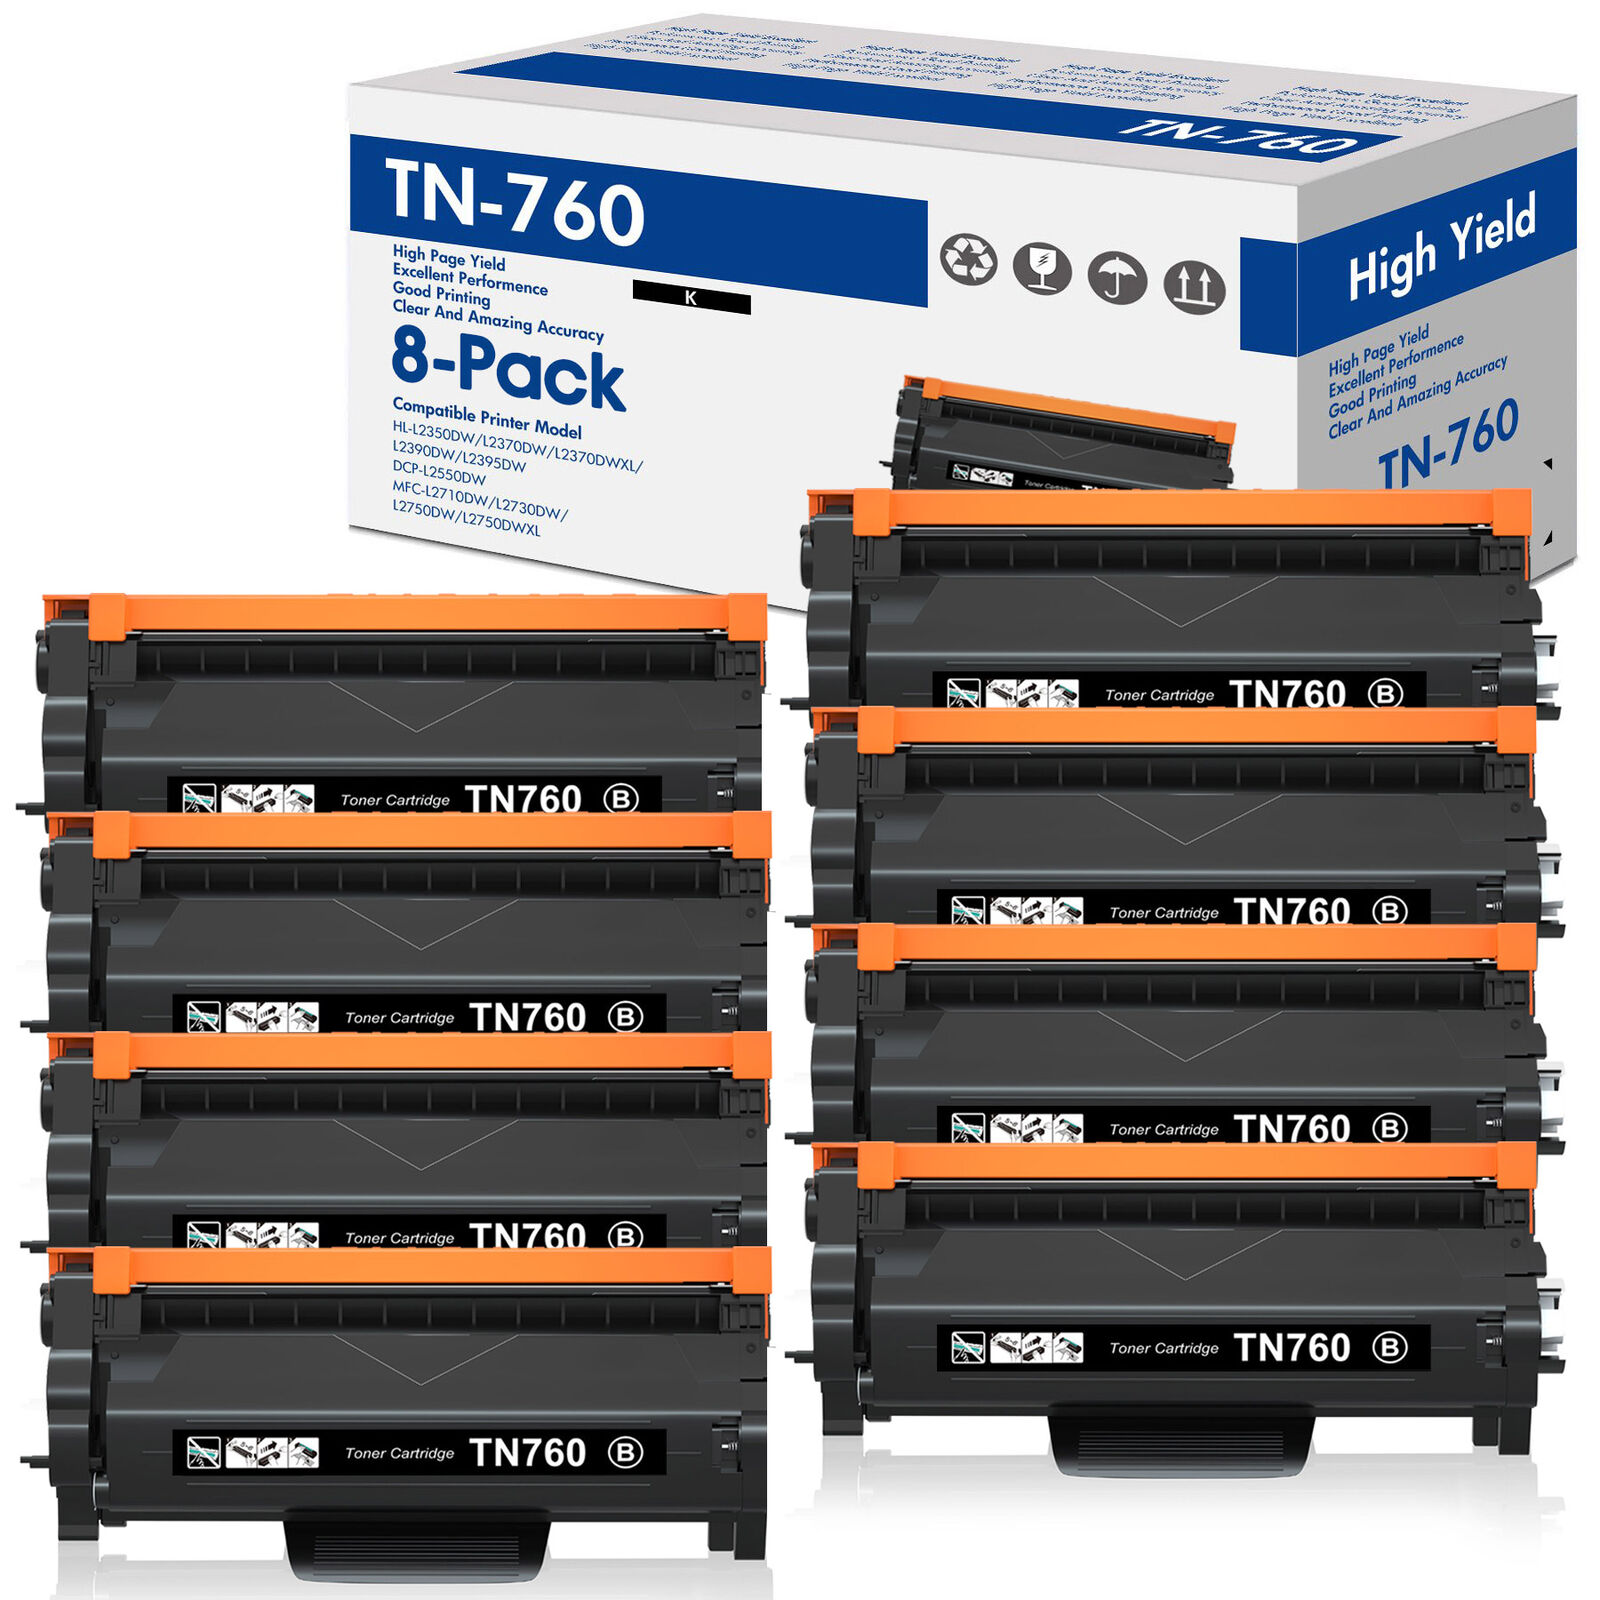 8x Toner Replacement for Brother TN760 MFC-L2750DW L2710DW DCP-L2550DW Printer